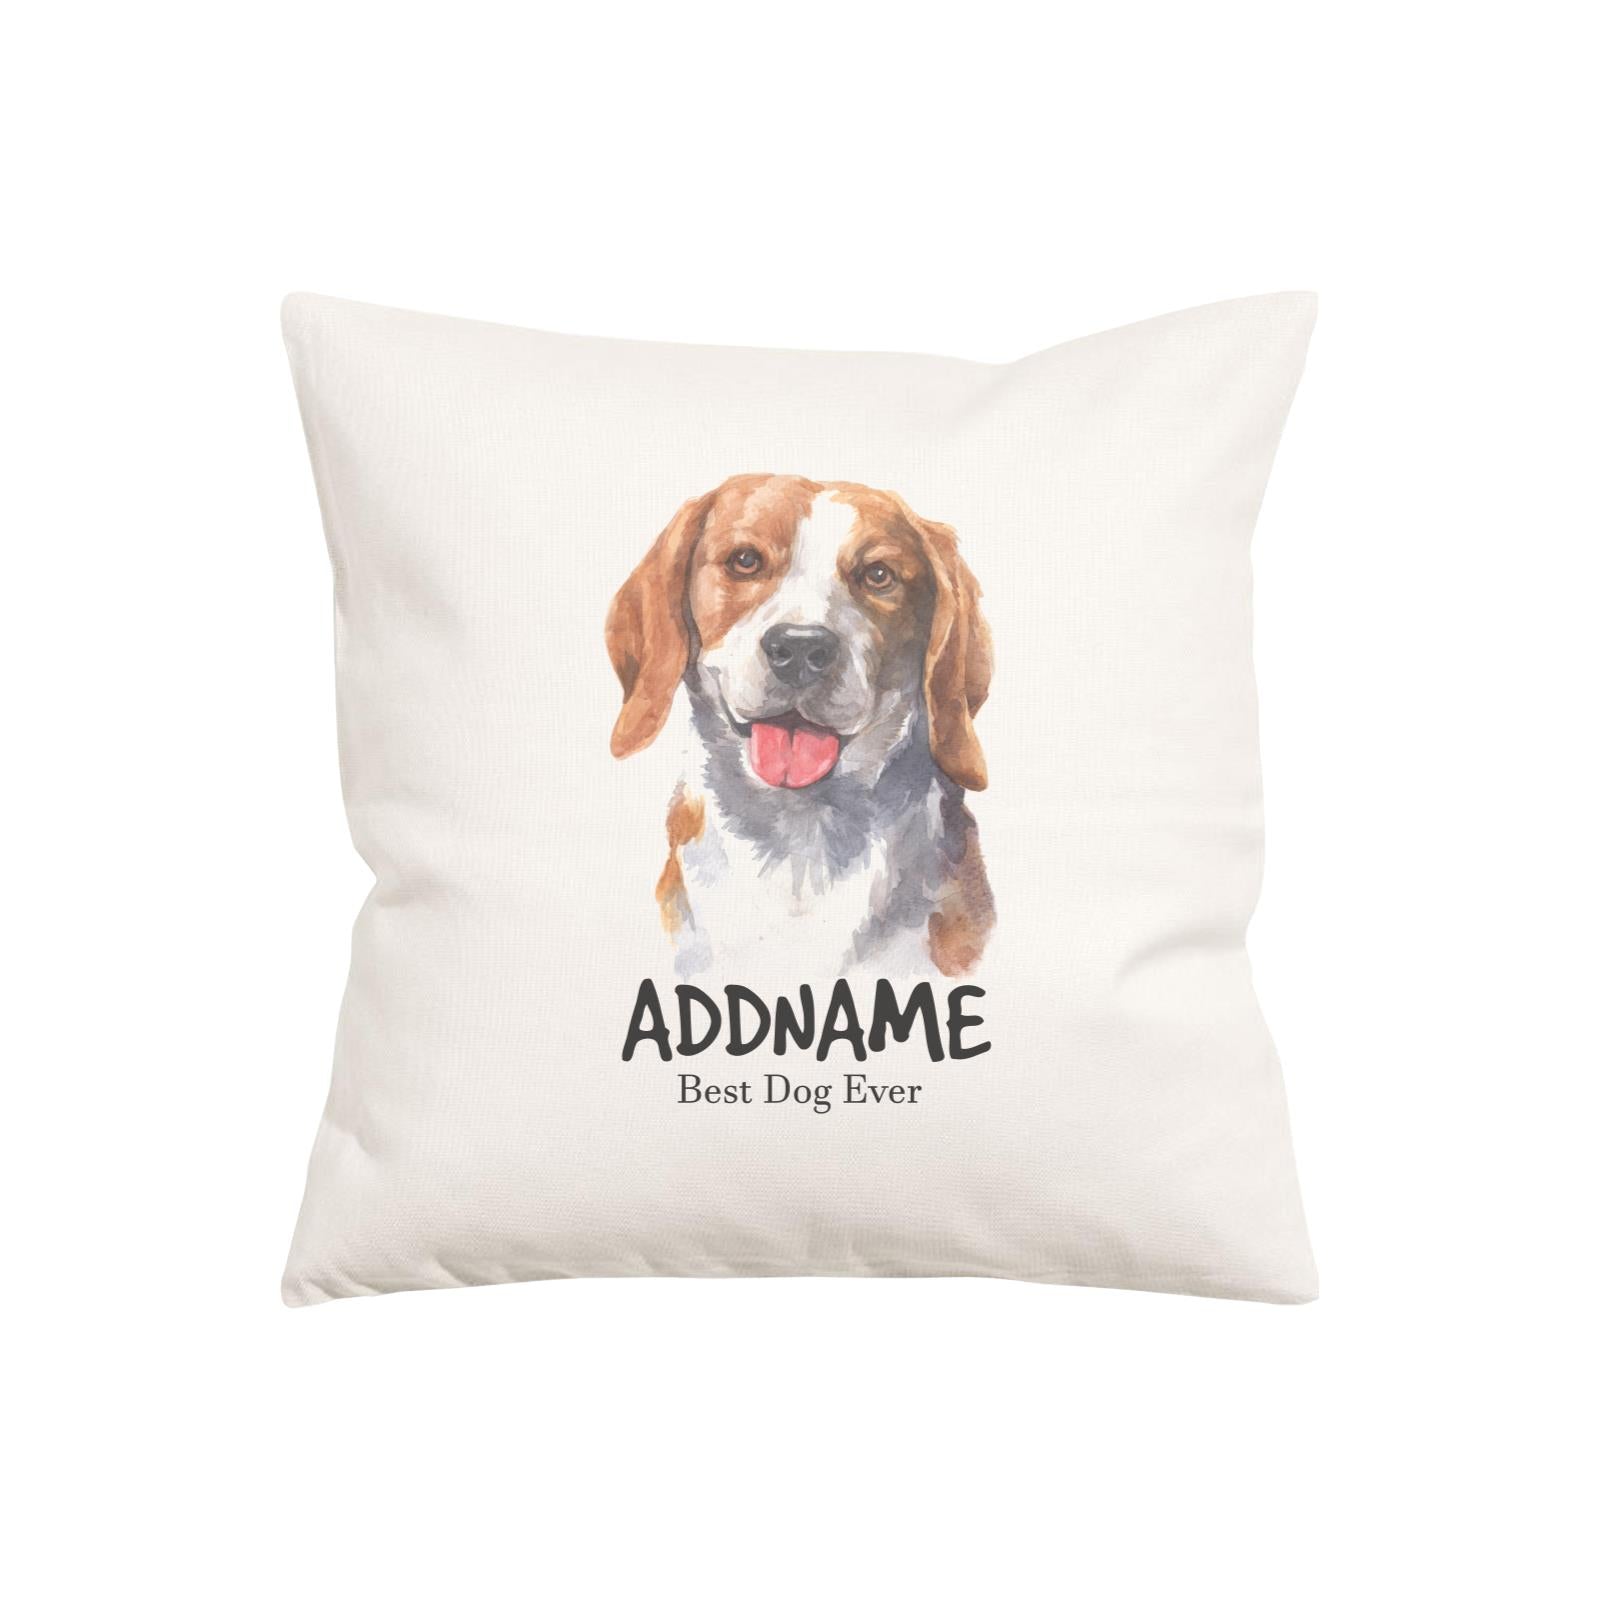 Watercolor Dog Series Beagal Smile Best Dog Ever Addname Pillow Cushion